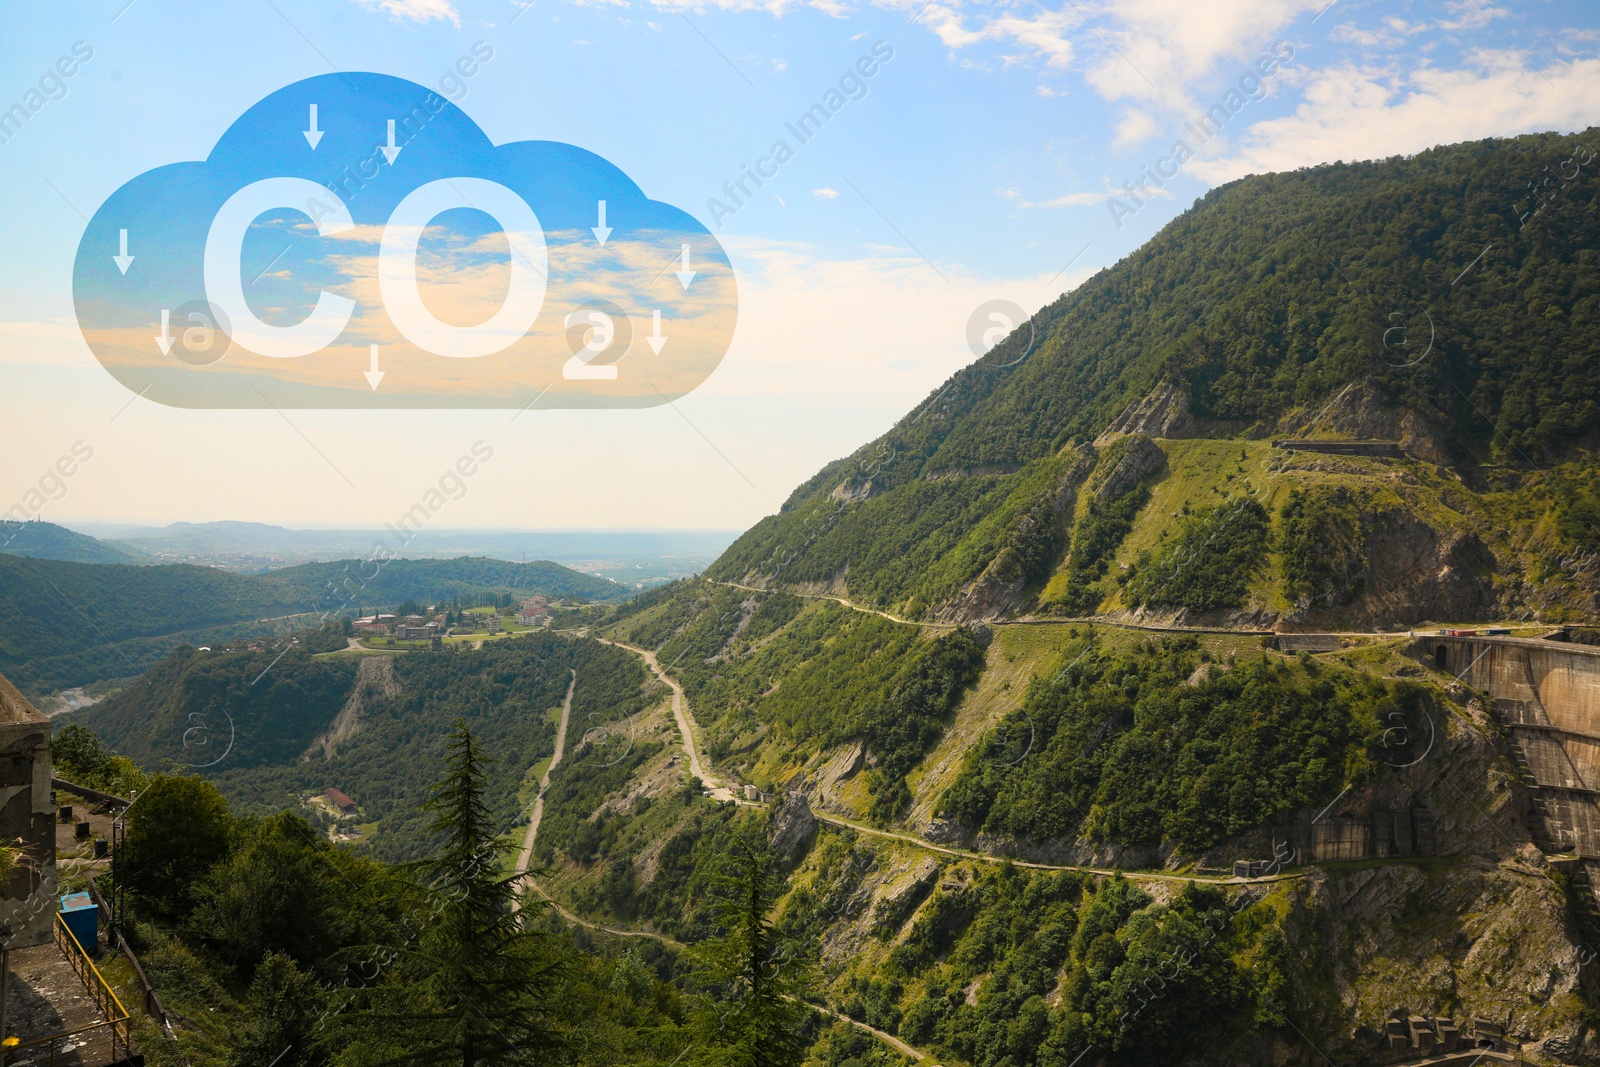 Image of Reduce CO2 emissions. Illustration of cloud with CO2 inscription, arrows and beautiful mountain landscape